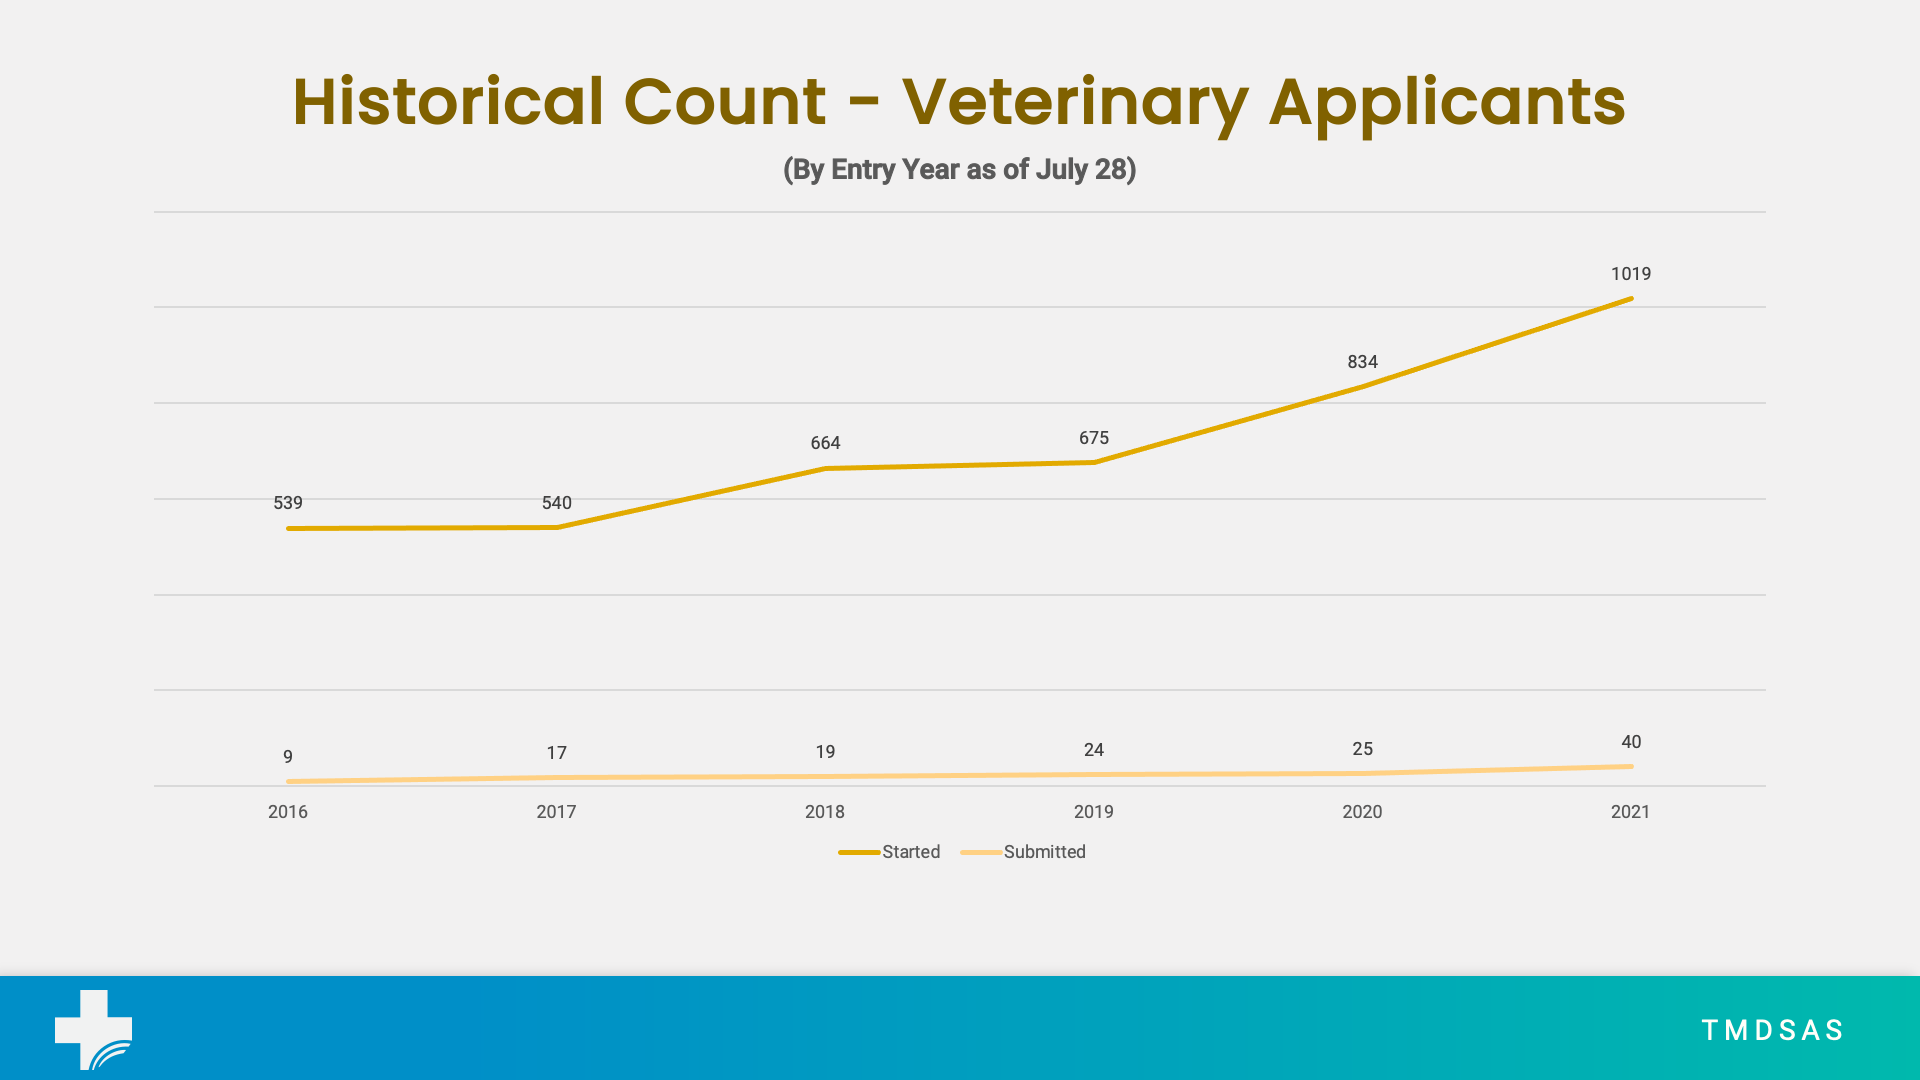 EY21 Veterinary Applications as of June 15, 2020